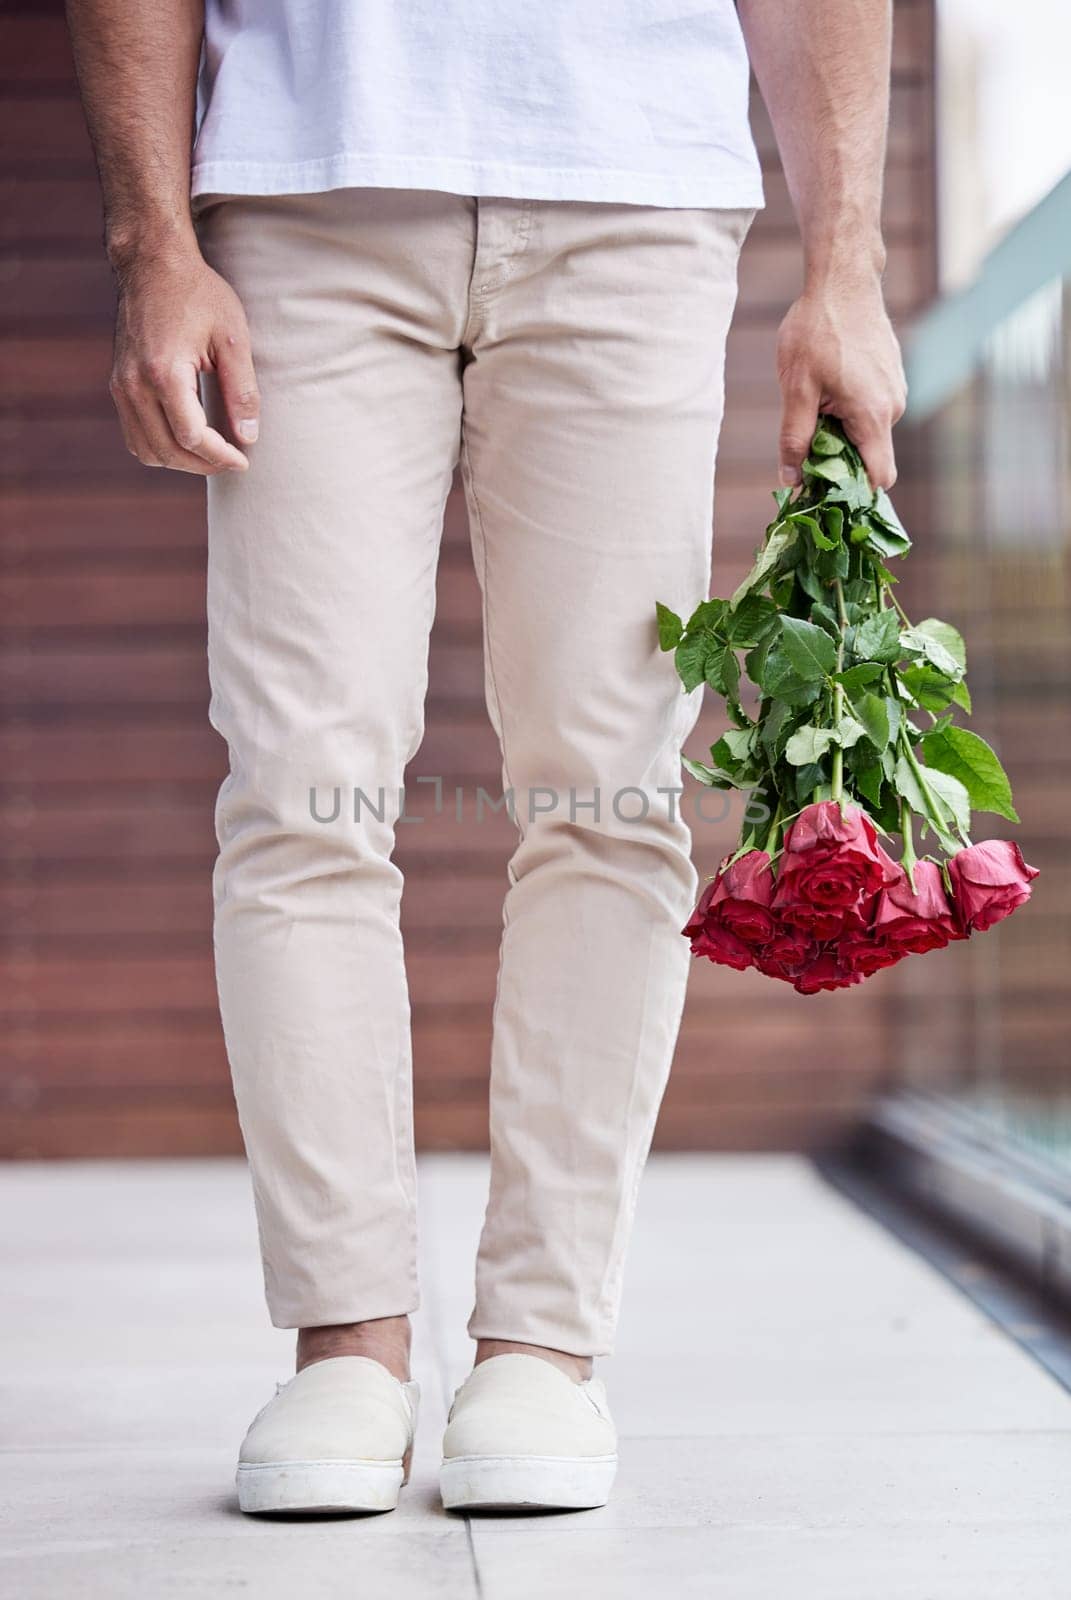 Hands, legs and man with bouquet of roses for date, romance and hope for valentines day. Love confession, romantic floral gift and person holding flowers, standing outside for proposal or engagement by YuriArcurs